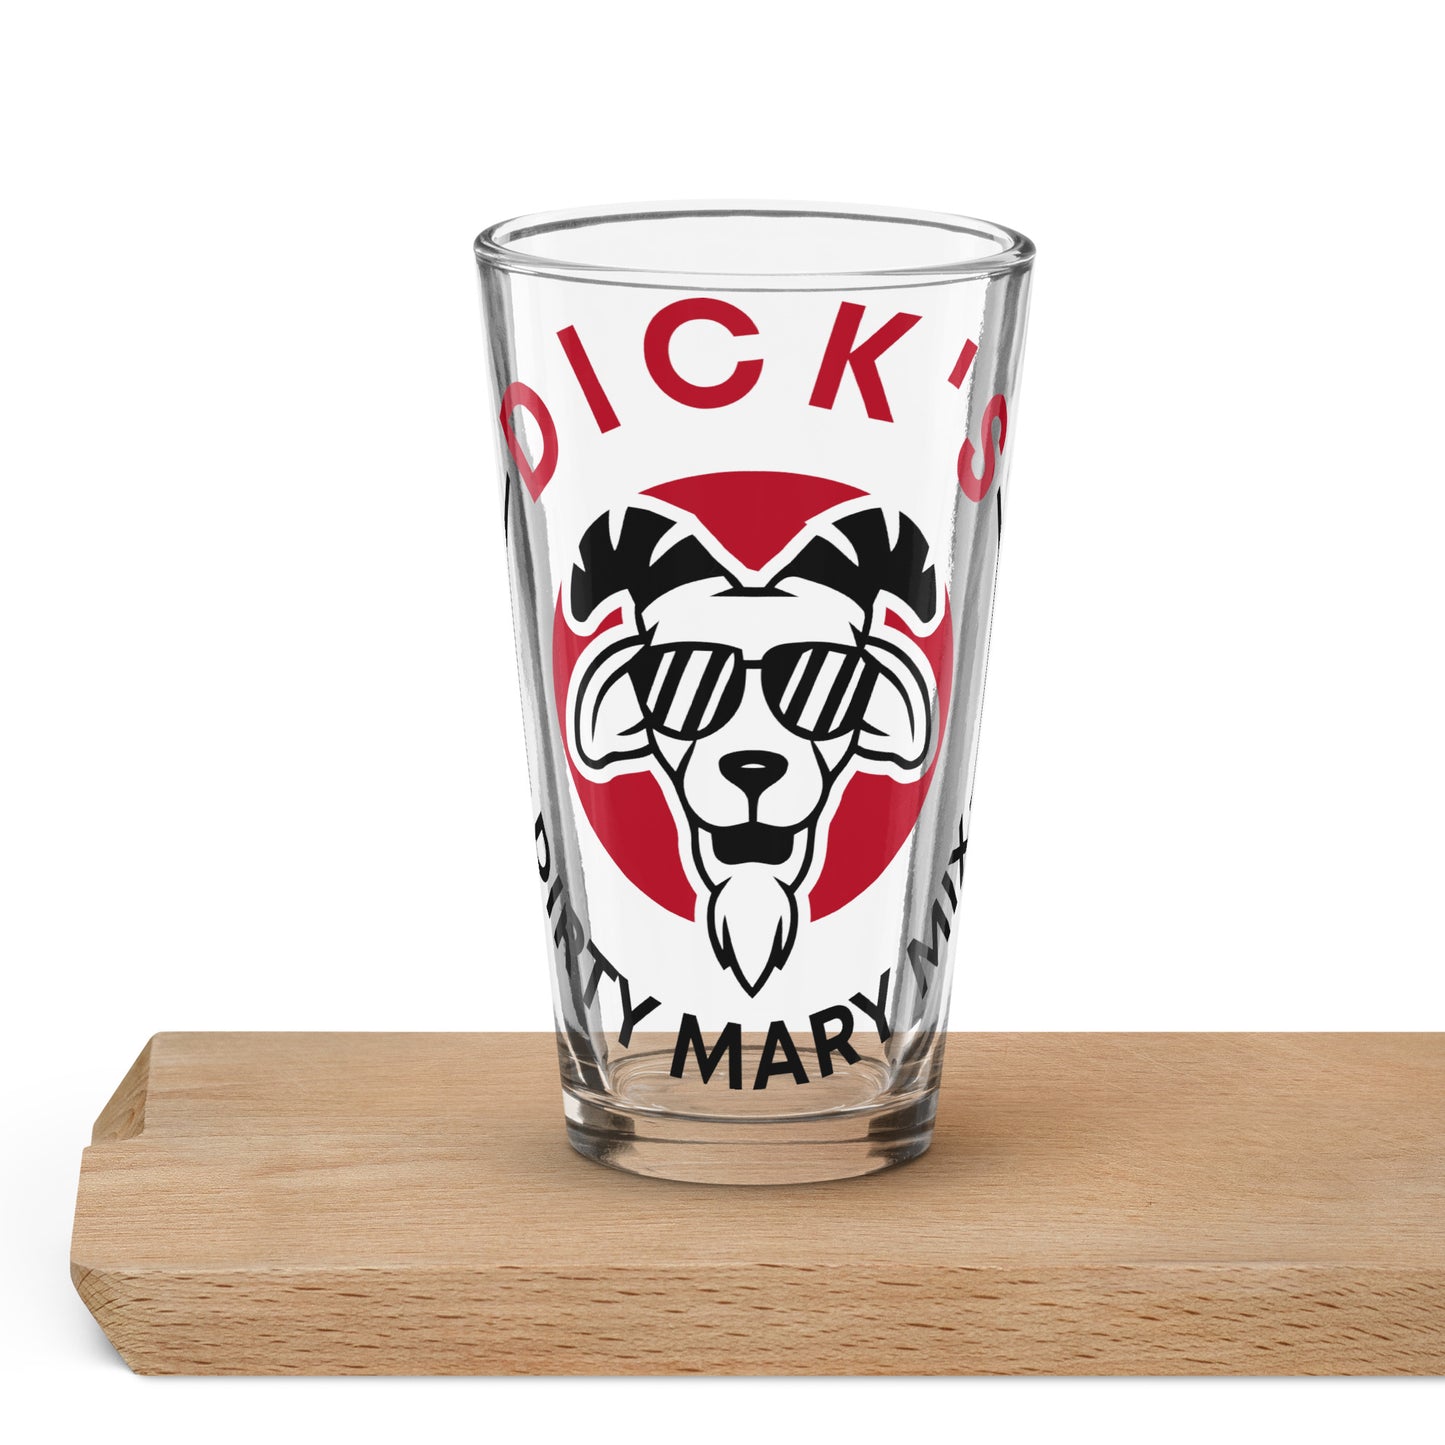 Dick's Bloody Mary Pint Glass